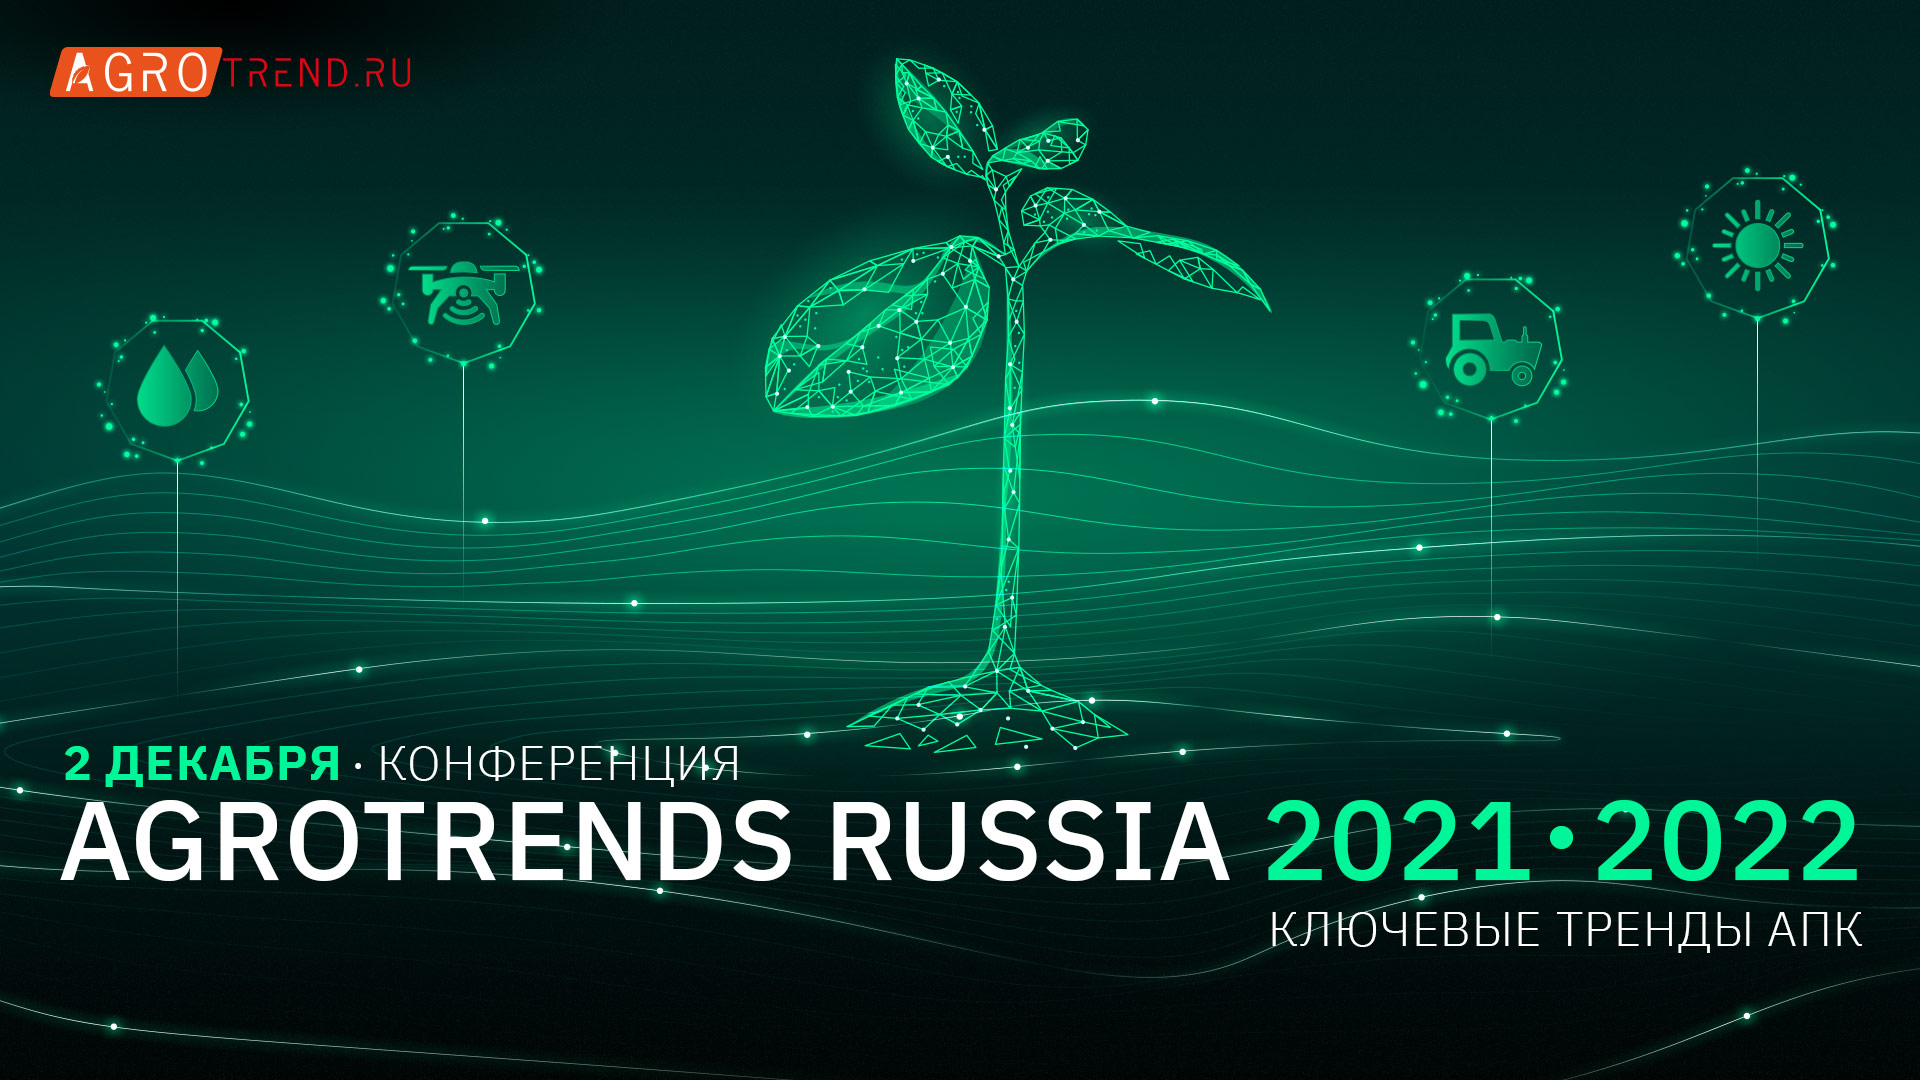 AGROTRENDS RUSSIA 2021-2022